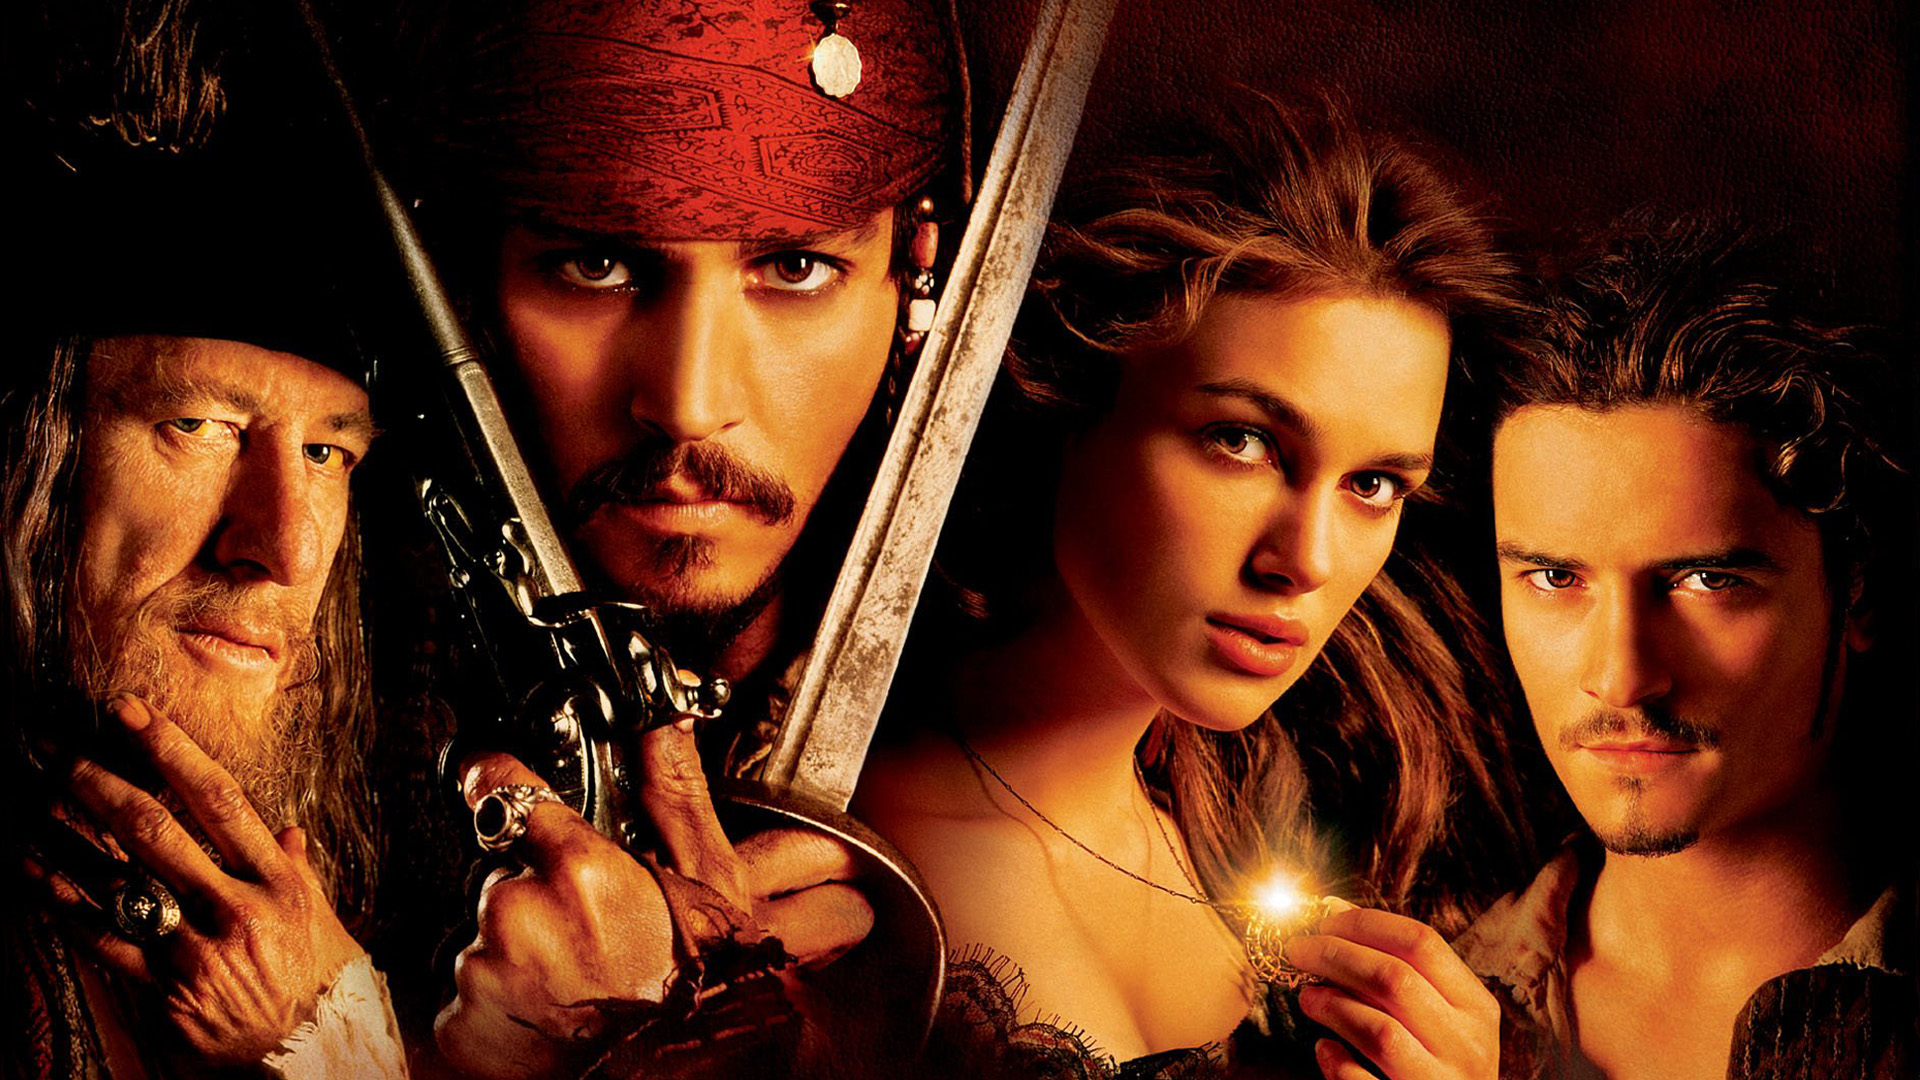 jack sparrow, pirates of the caribbean: the curse of the black pearl, keira knightley, movie, elizabeth swann, geoffrey rush, hector barbossa, johnny depp, orlando bloom, will turner, pirates of the caribbean for android